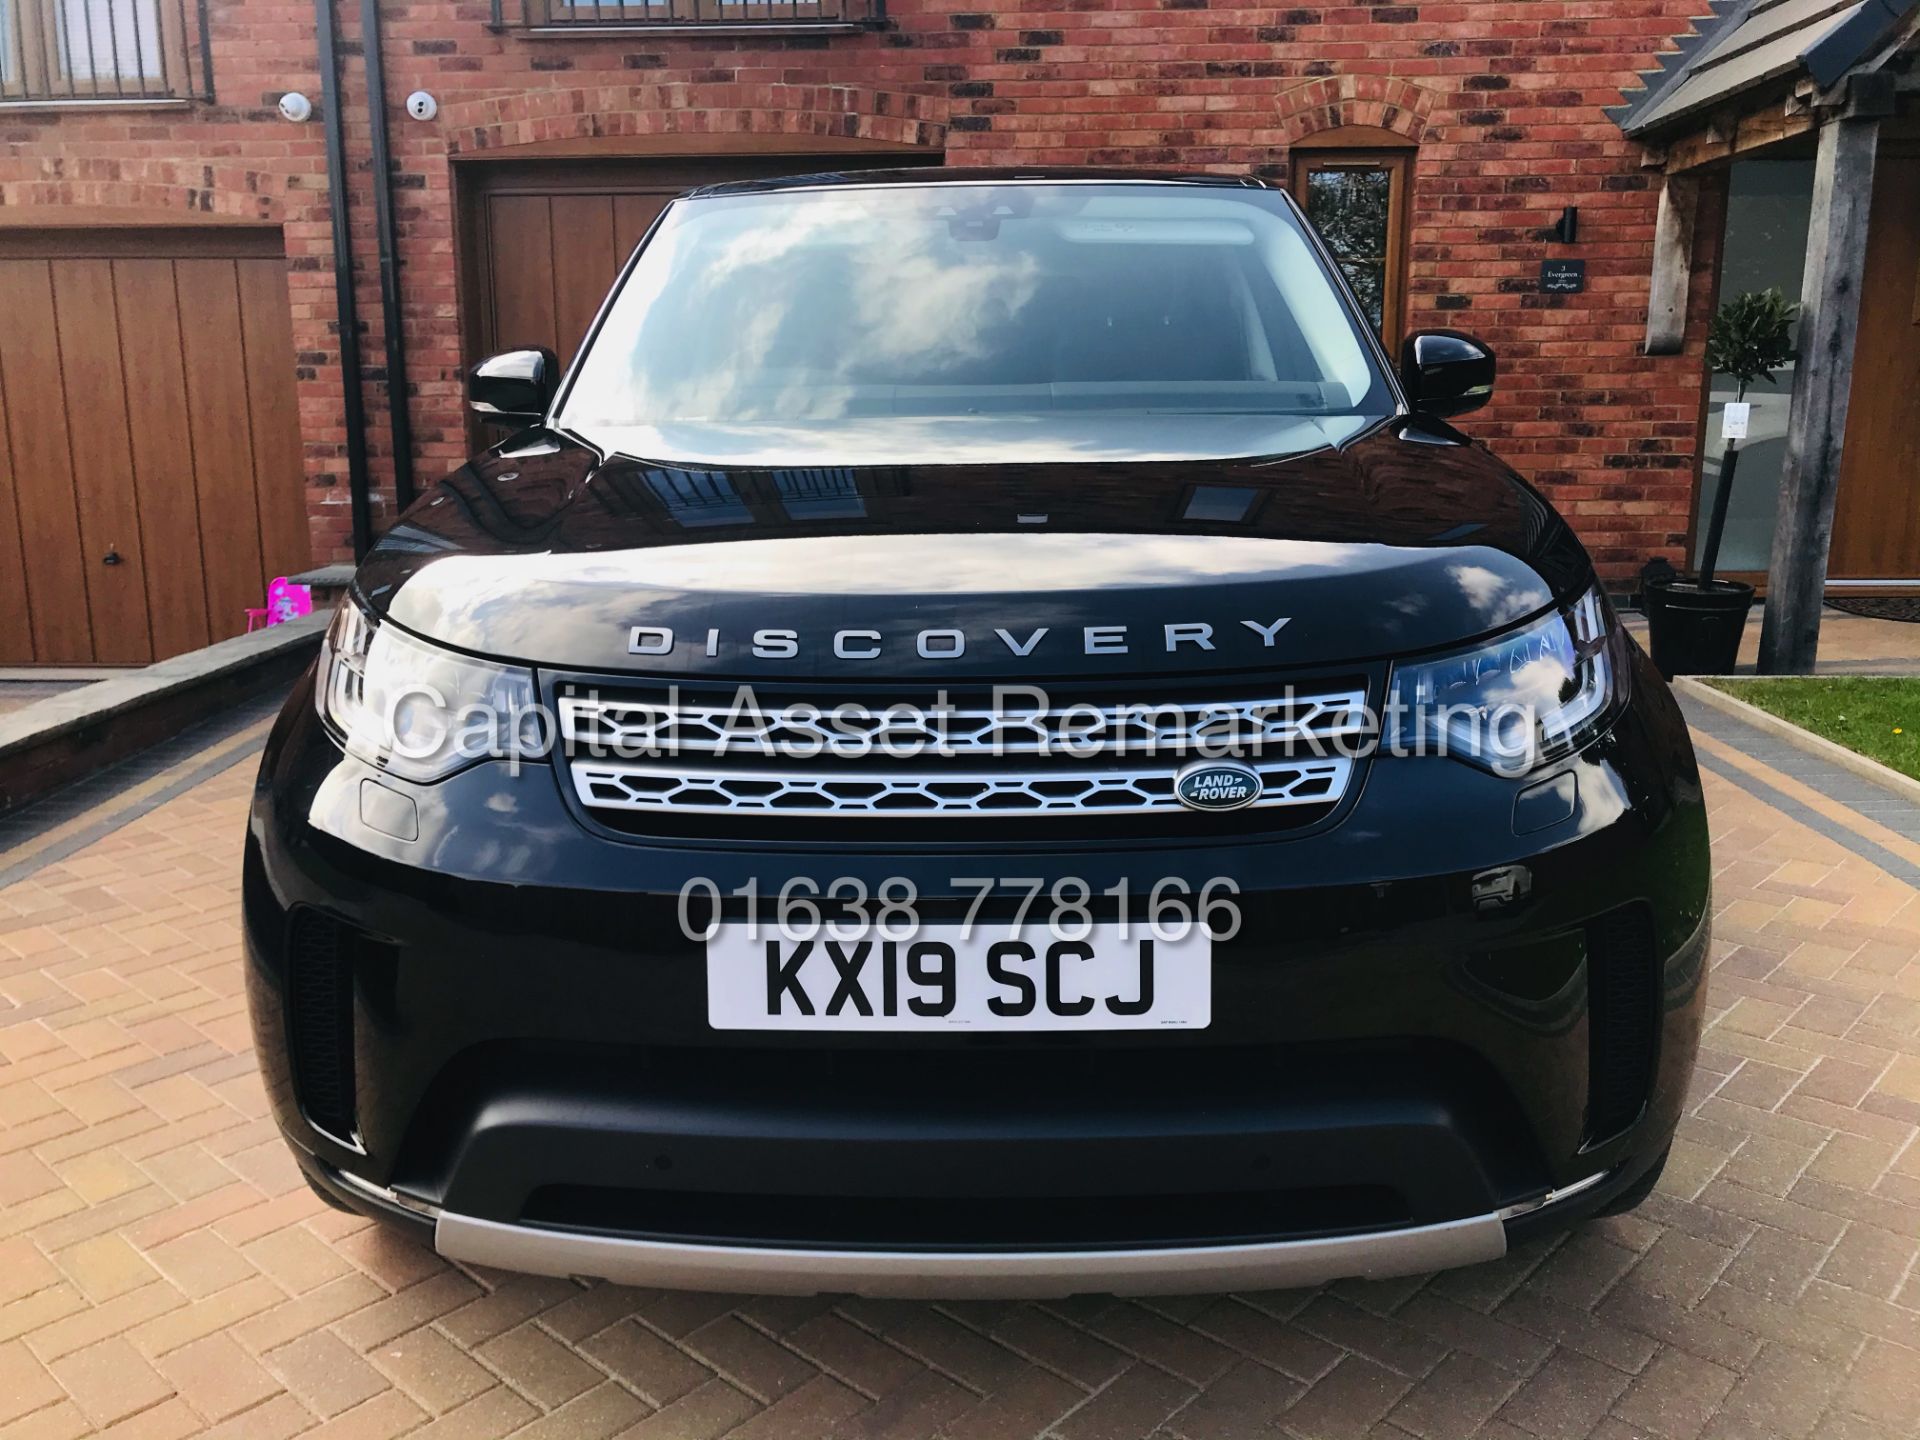 ON SALE LAND ROVER DISCOVERY 3.0 SDV6 "HSE EDITION"7 SEATER(19 REG) 1 OWNER-HUGE SPEC *PAN ROOF* 15K - Image 4 of 27